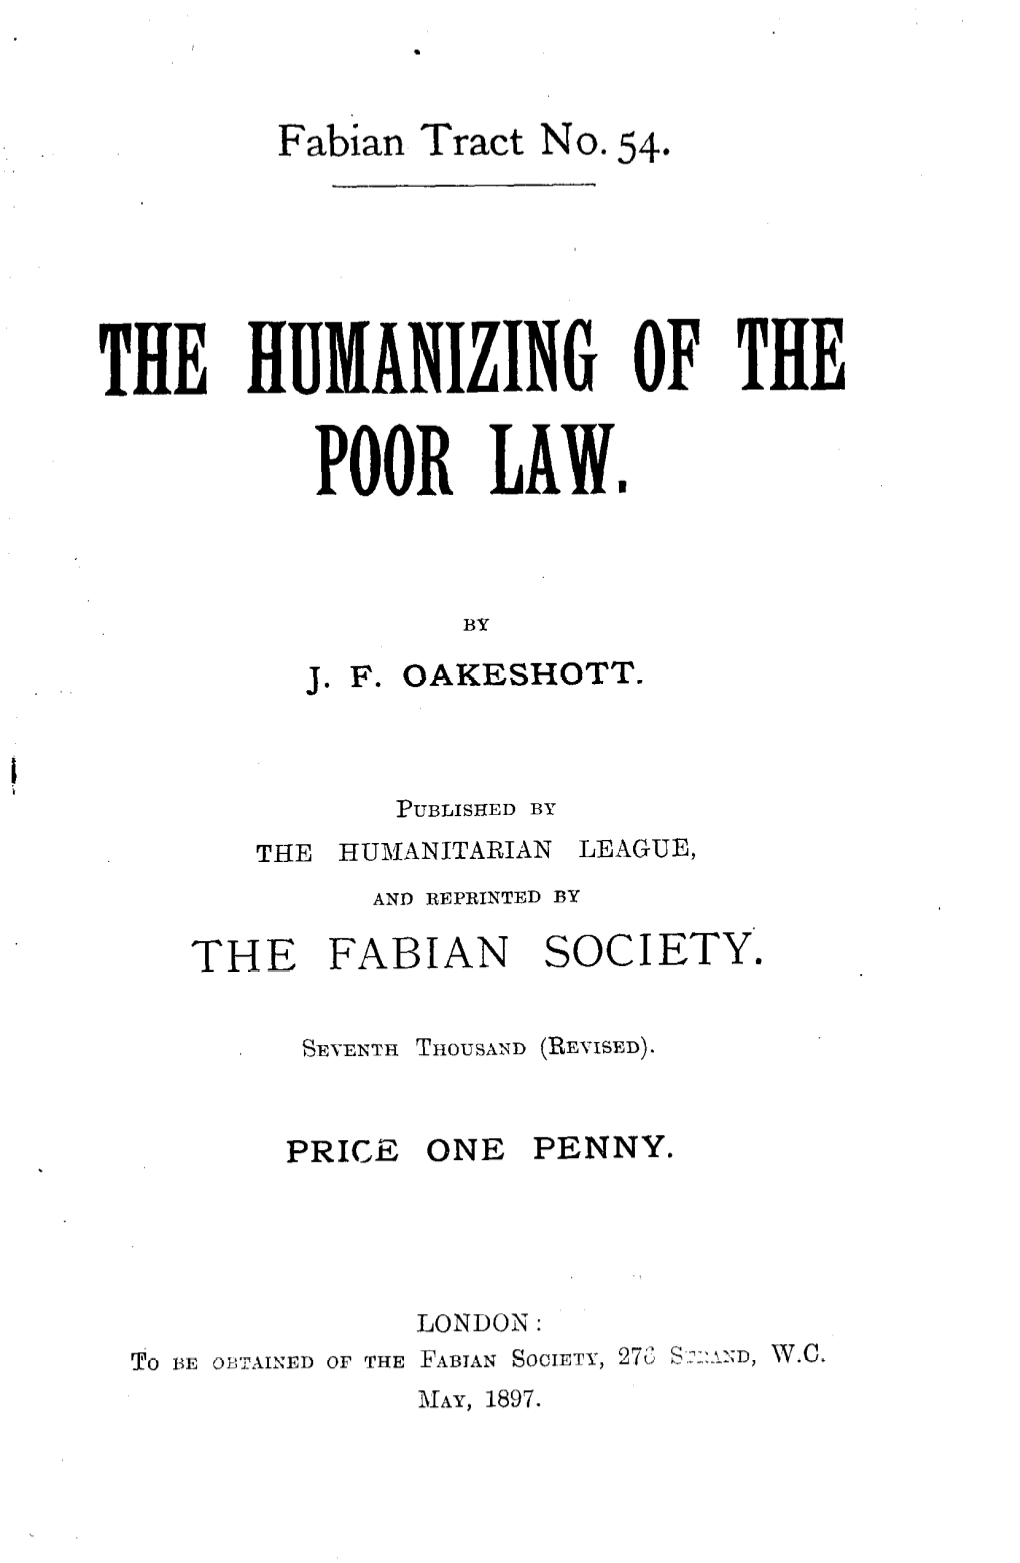 The Humanizing of the Poor Law. by J